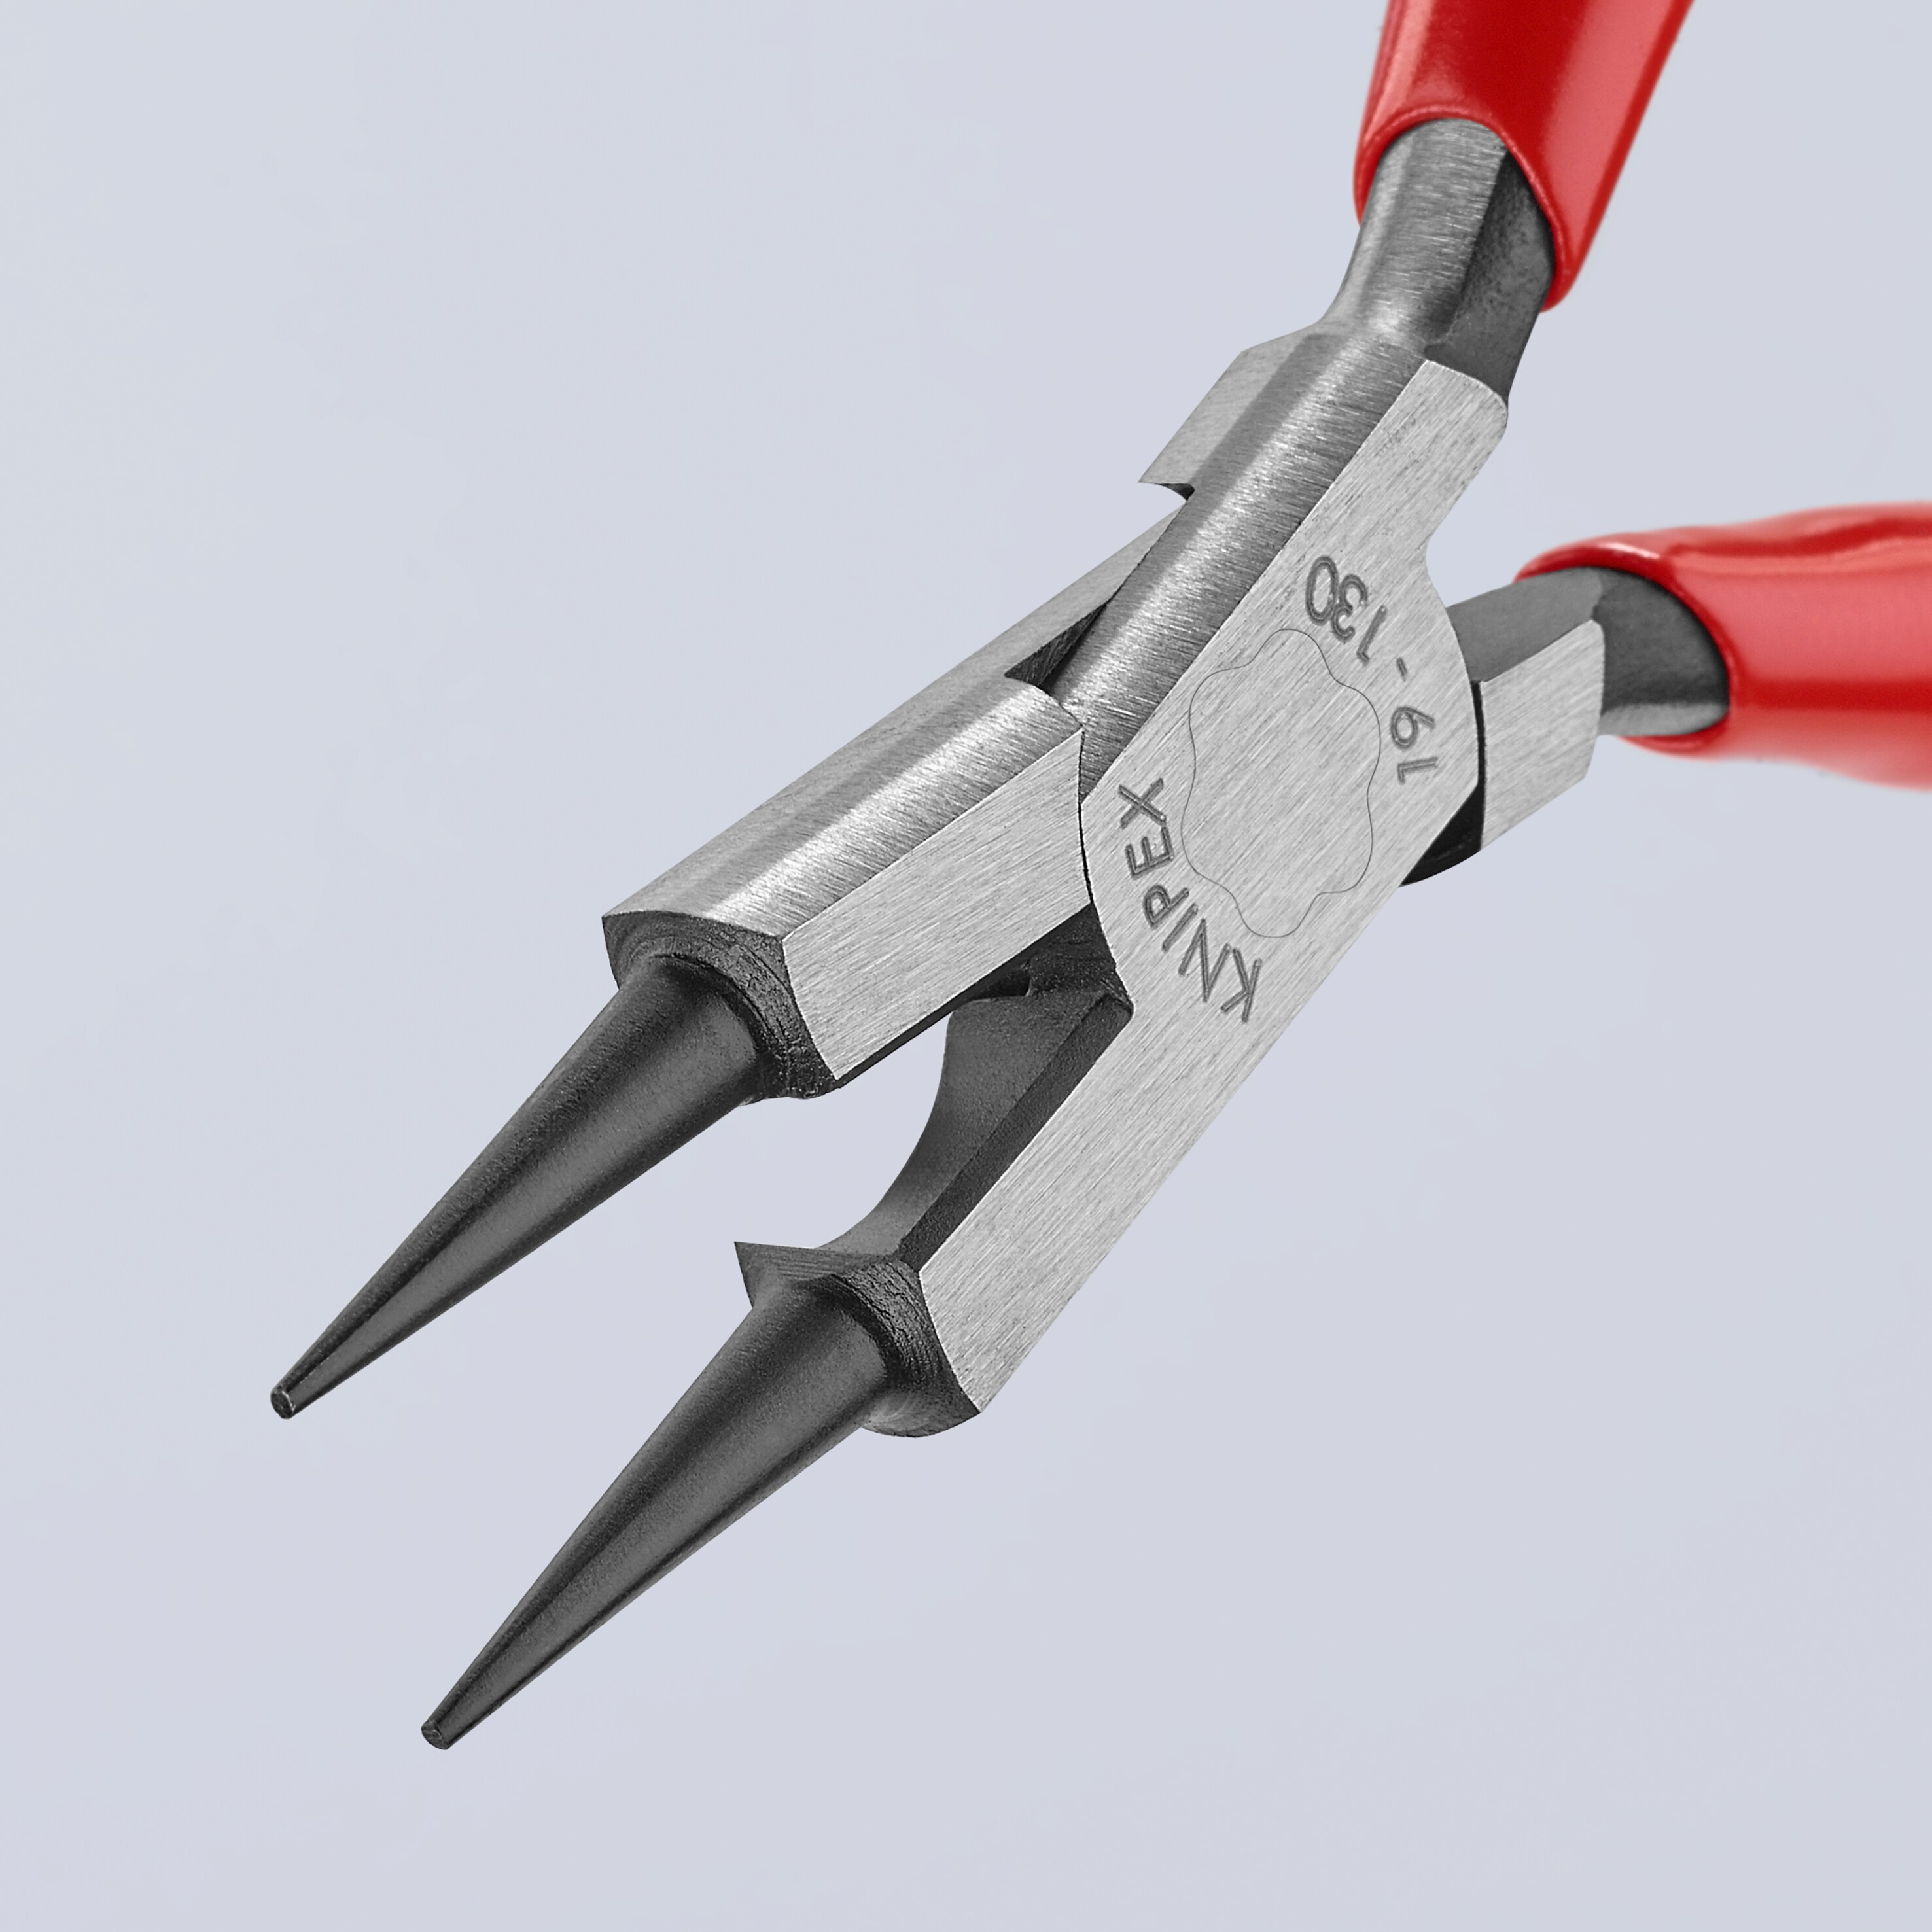 KNIPEX 5.2-in Home Repair Needle Nose Pliers with Wire Cutter in